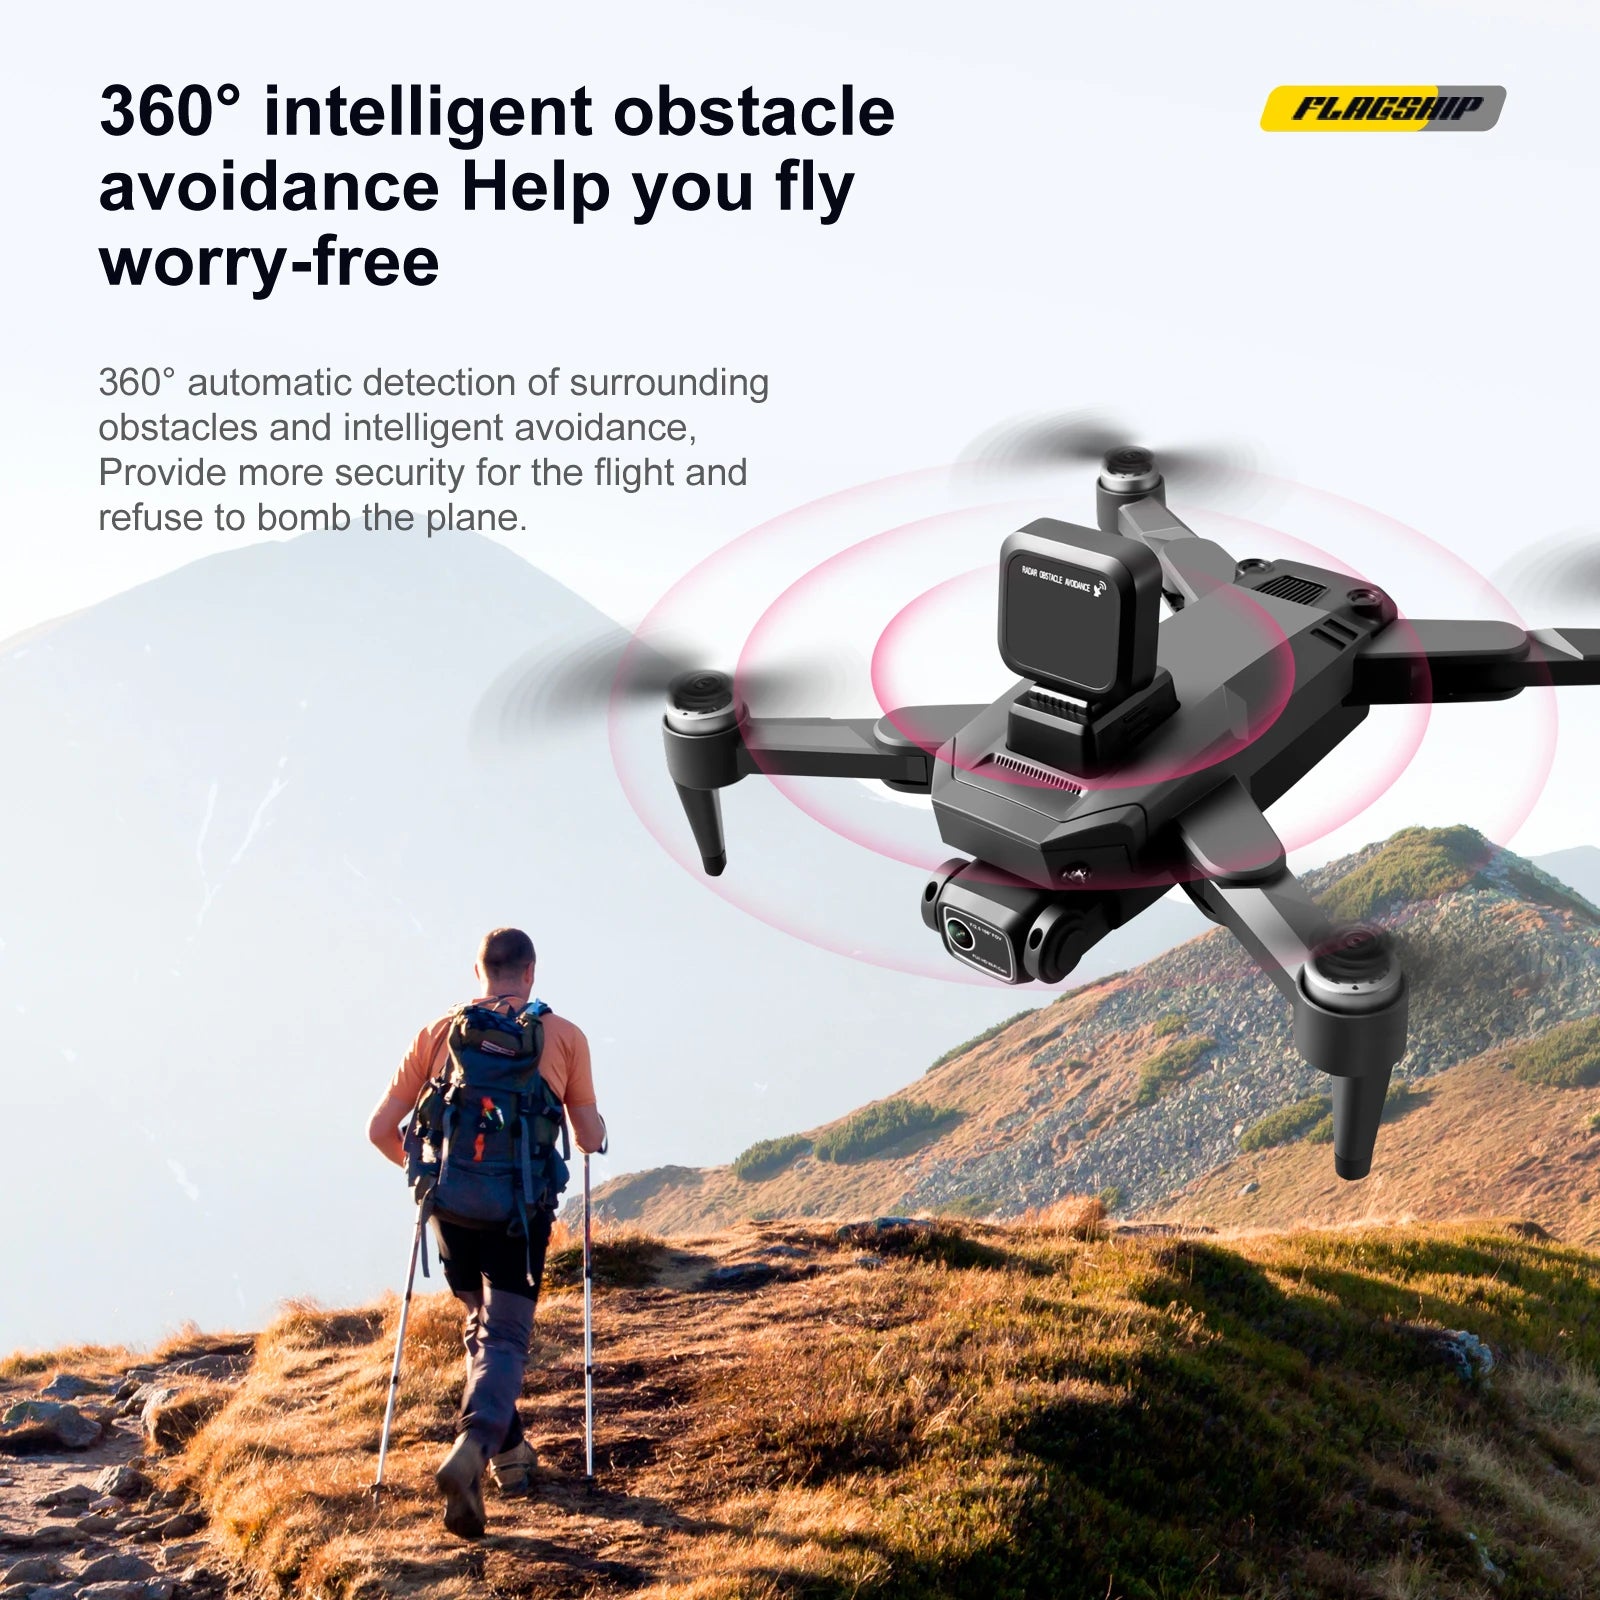 S109 GPS Drone, 3609 intelligent obstacle FLAESHIP avoidance you fly worry-free 3605 automatic detection